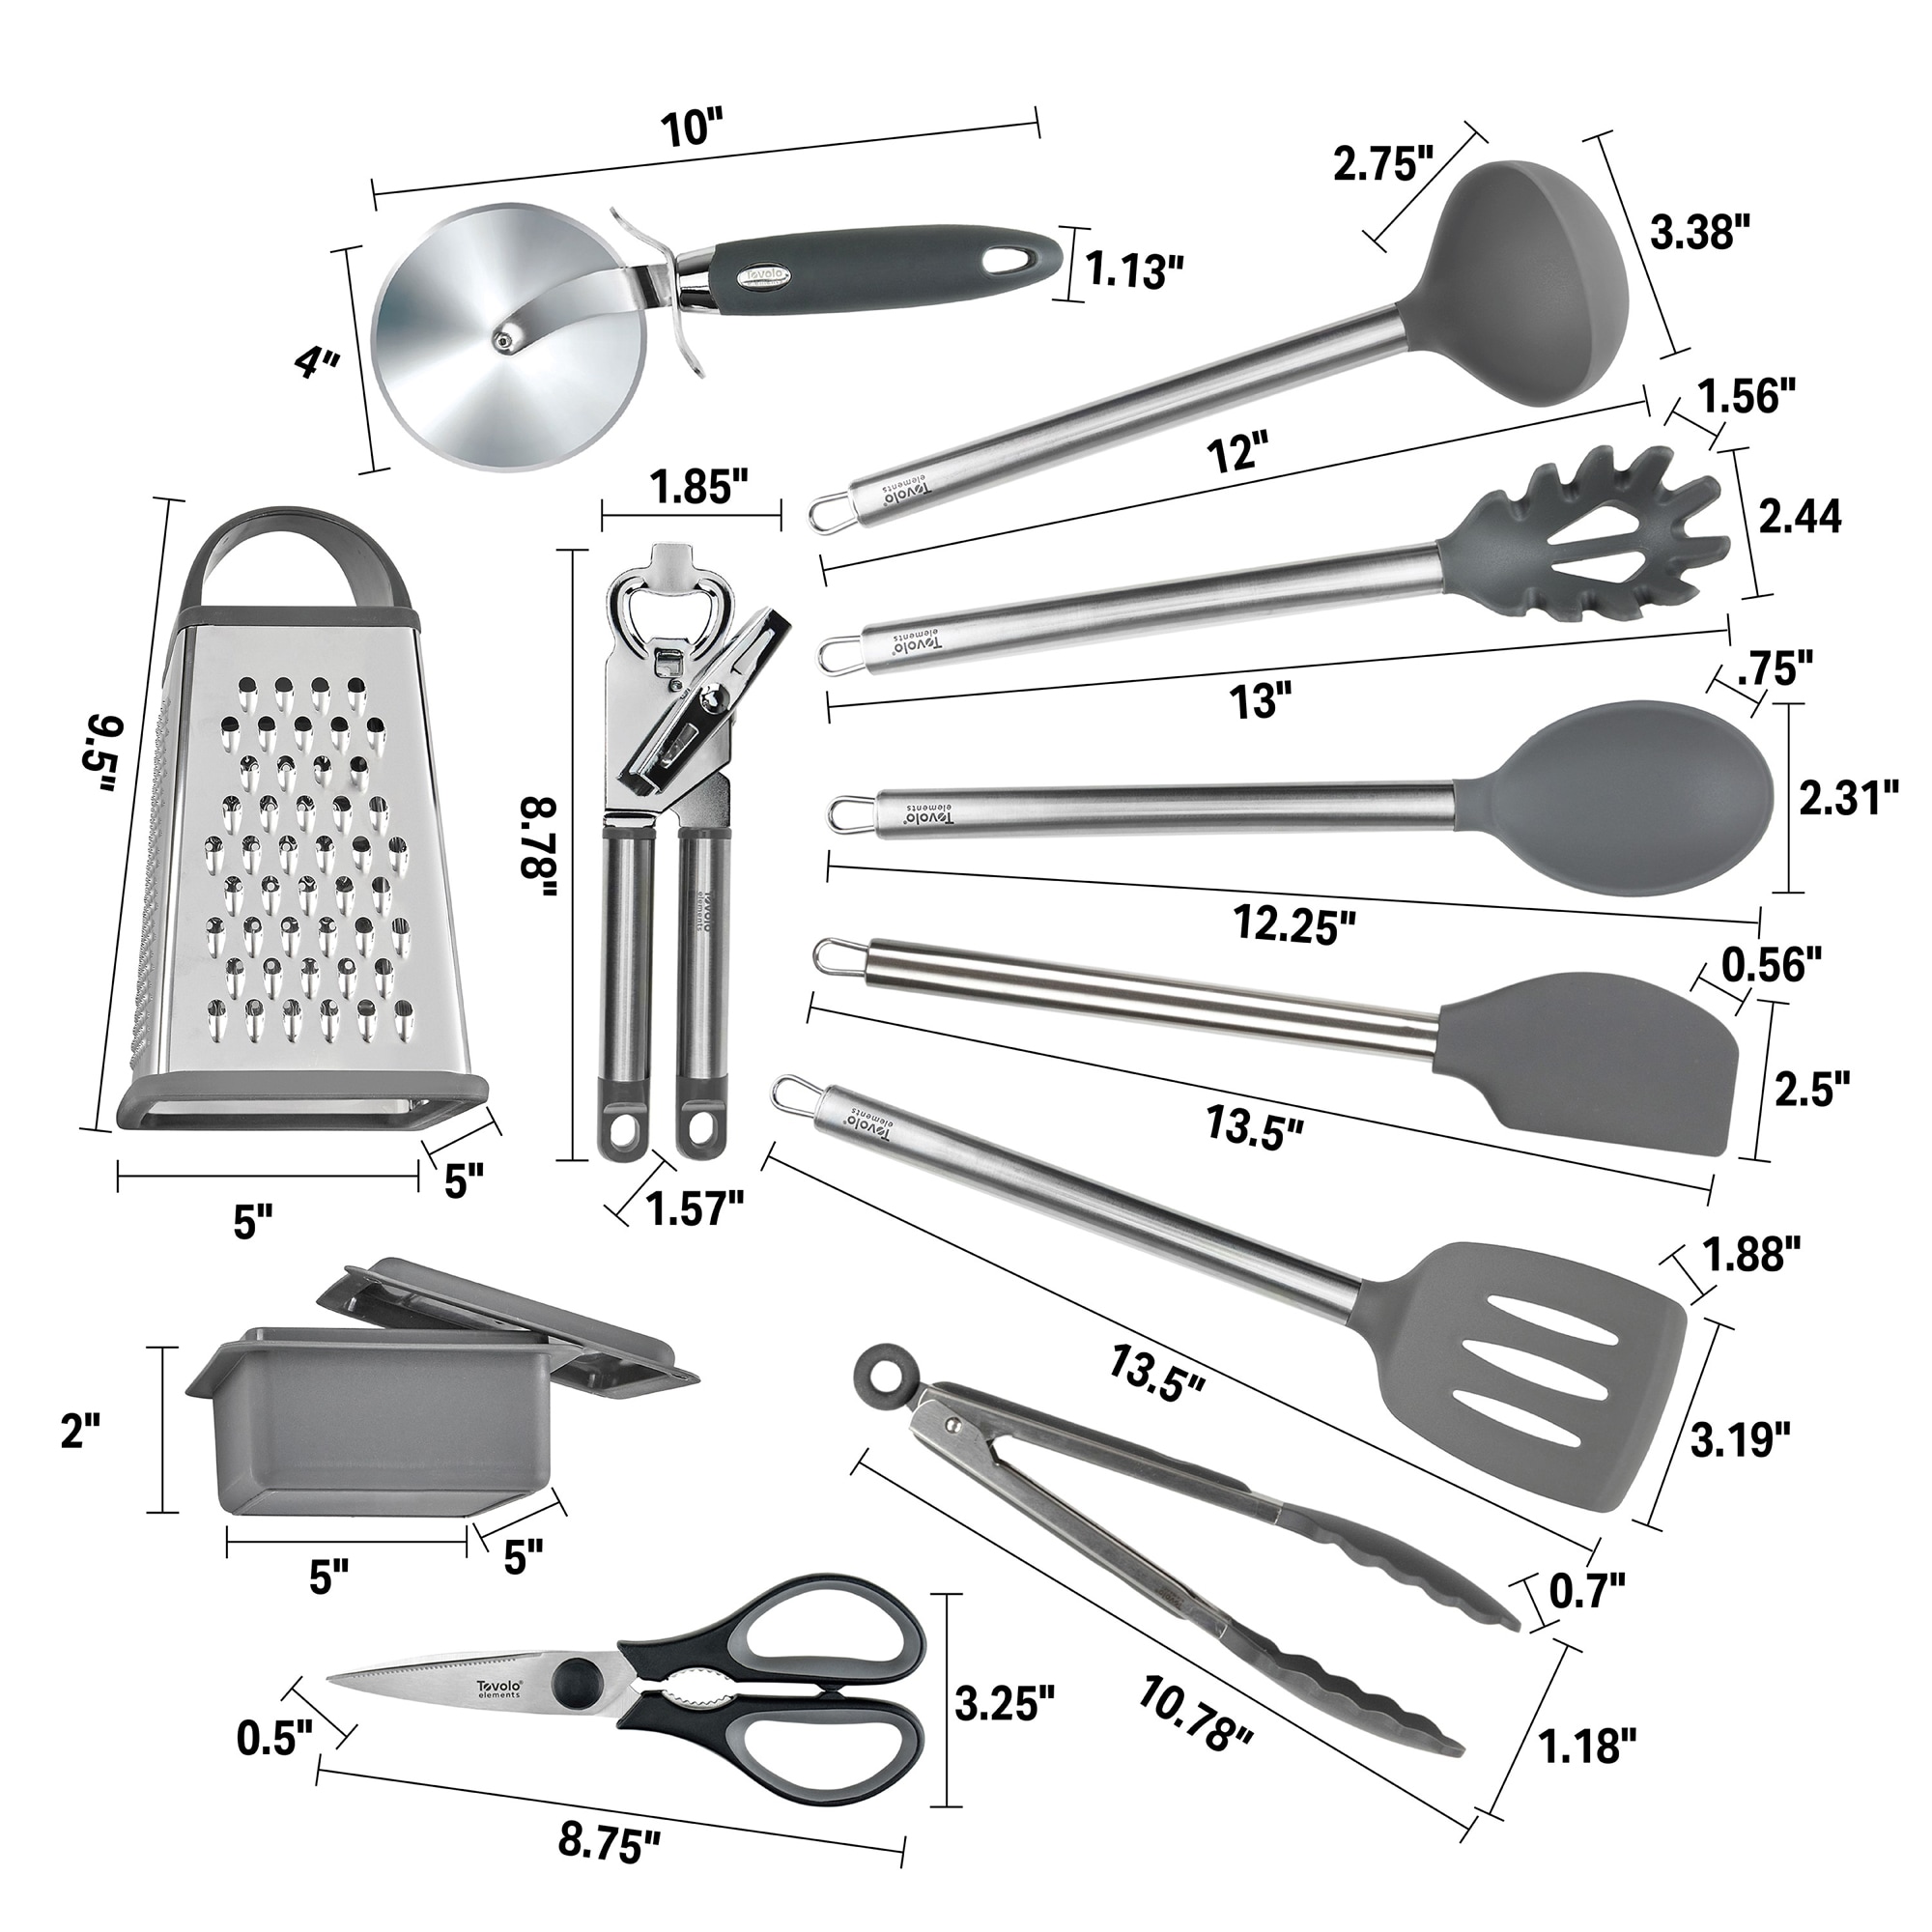 Tovolo 6-Piece Assorted Kitchen Utensil Set Oyster Gray